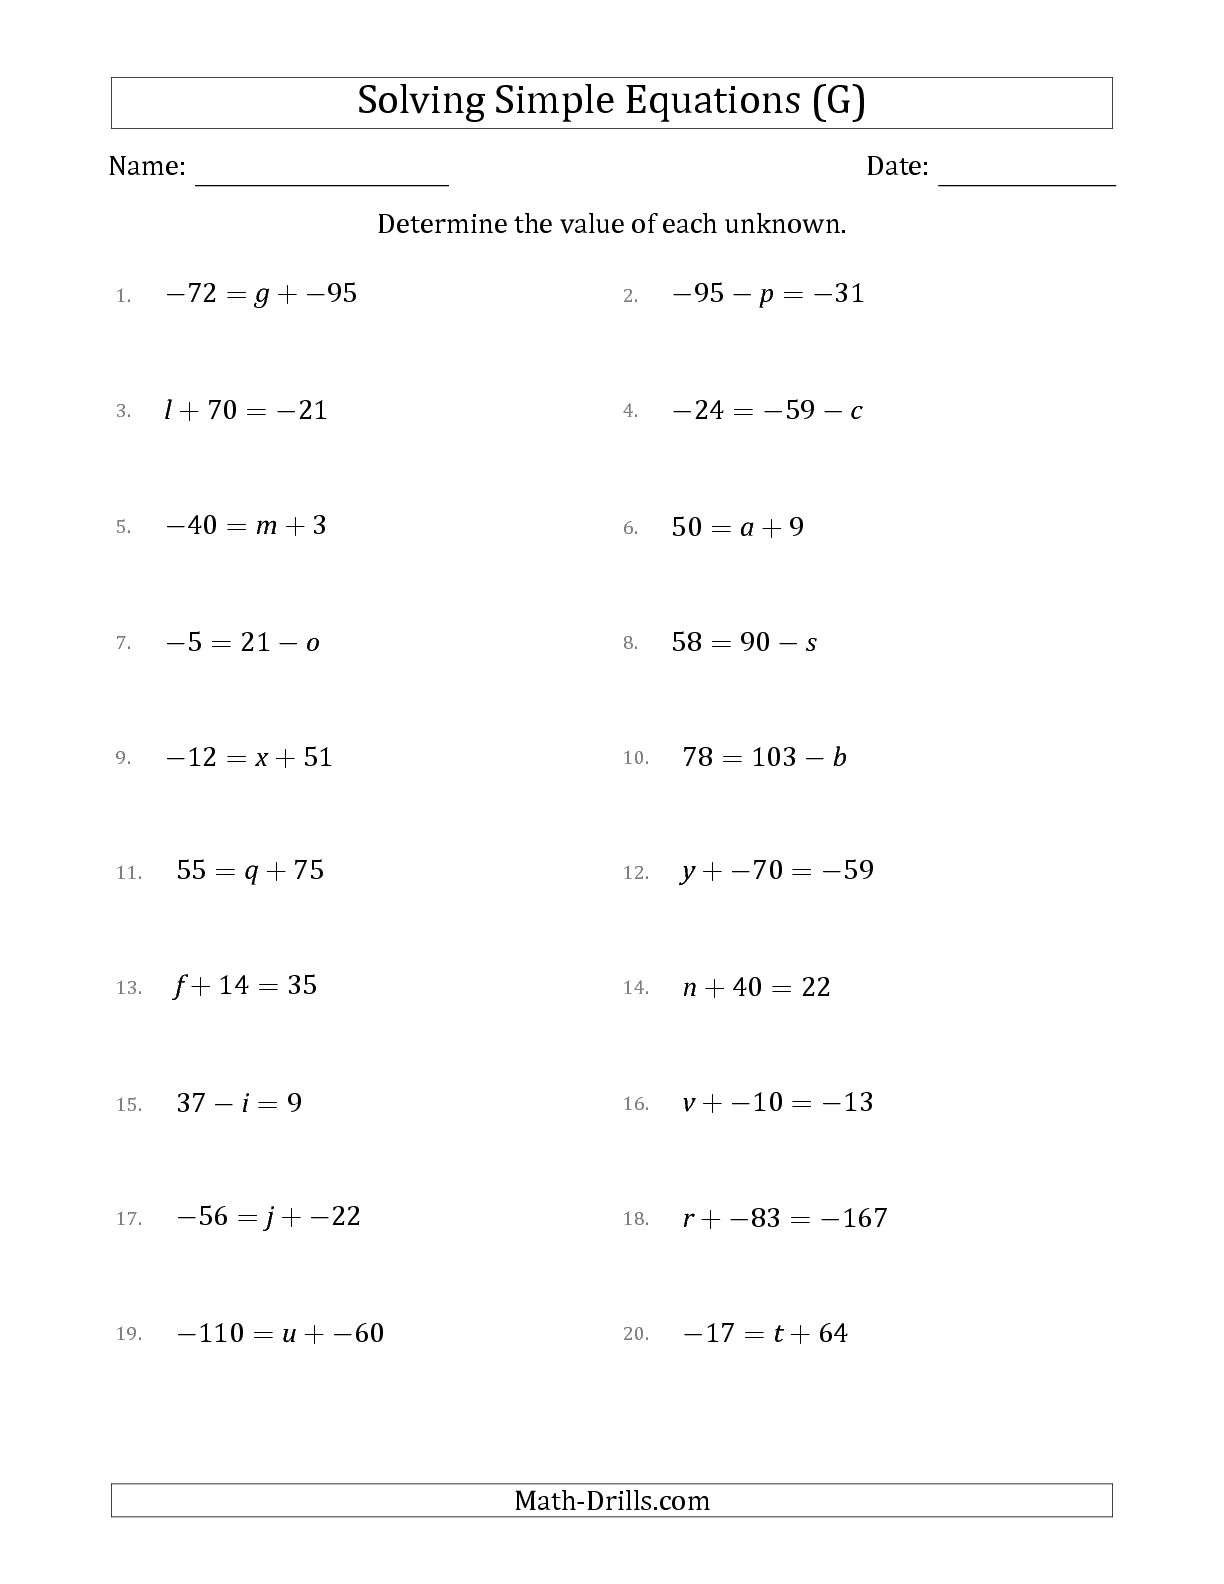 creating-and-solving-equations-worksheet